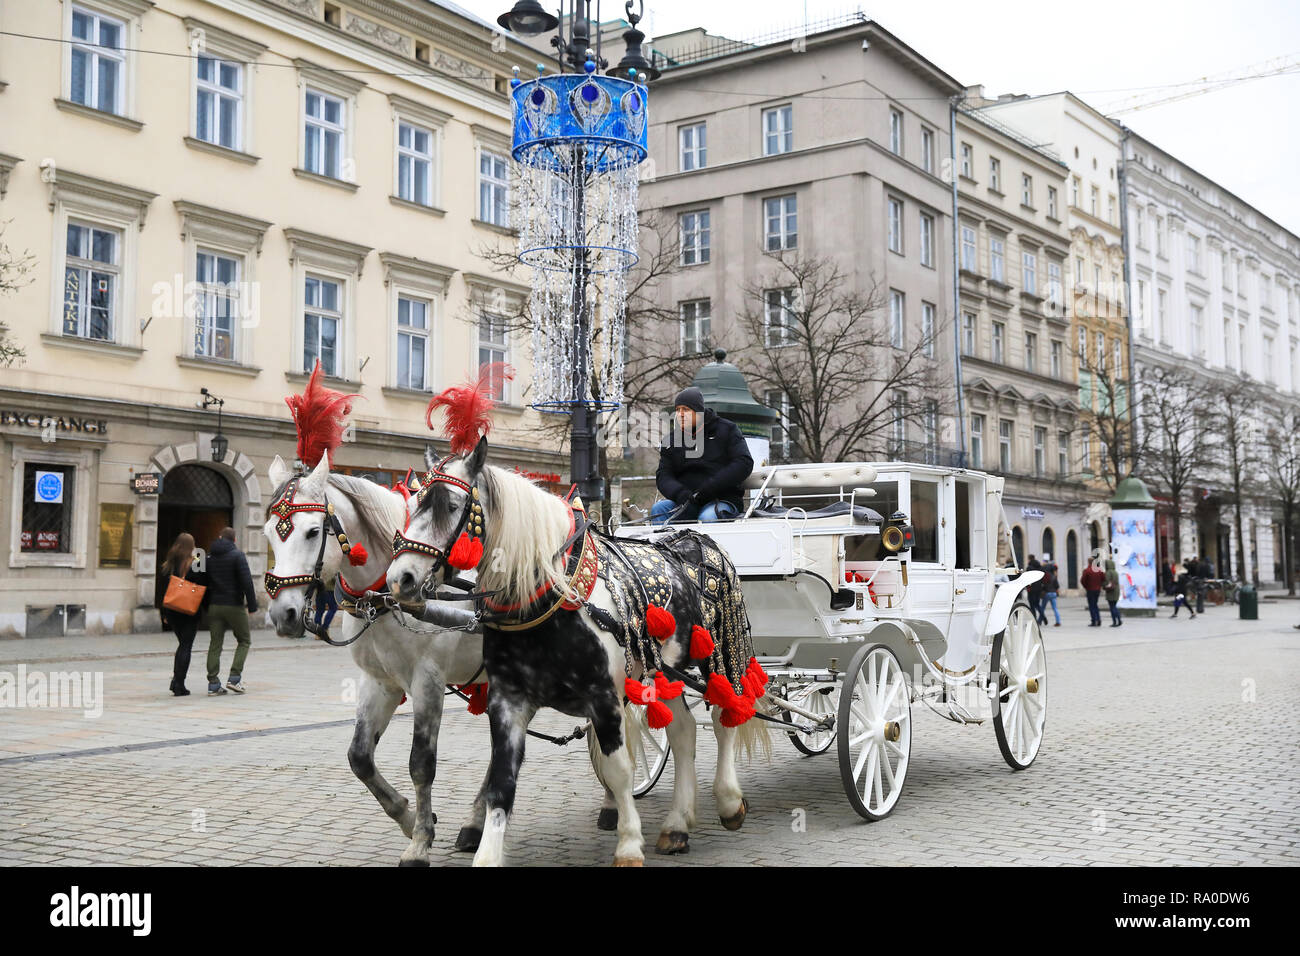 One of the pretty horse & carriages on Main Market Square, at Christmas time, in Krakow, Poland Stock Photo